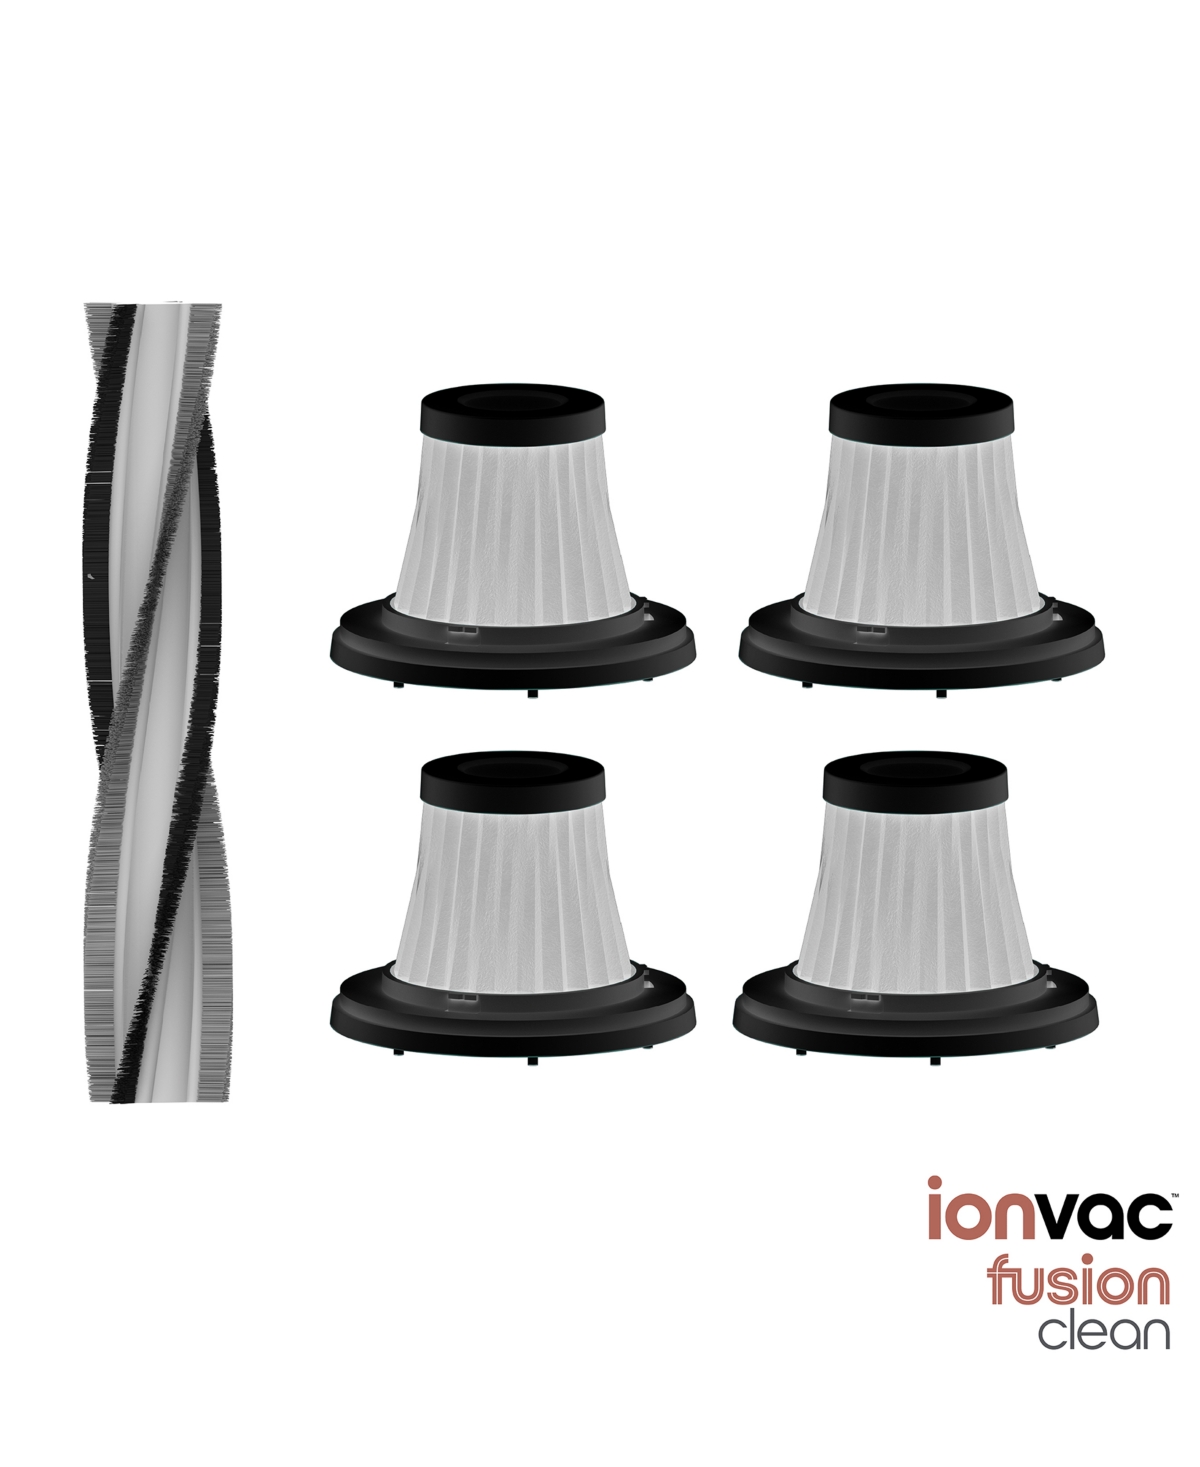 ionvac FusionClean Brush and Filter Replacement Kit - Black